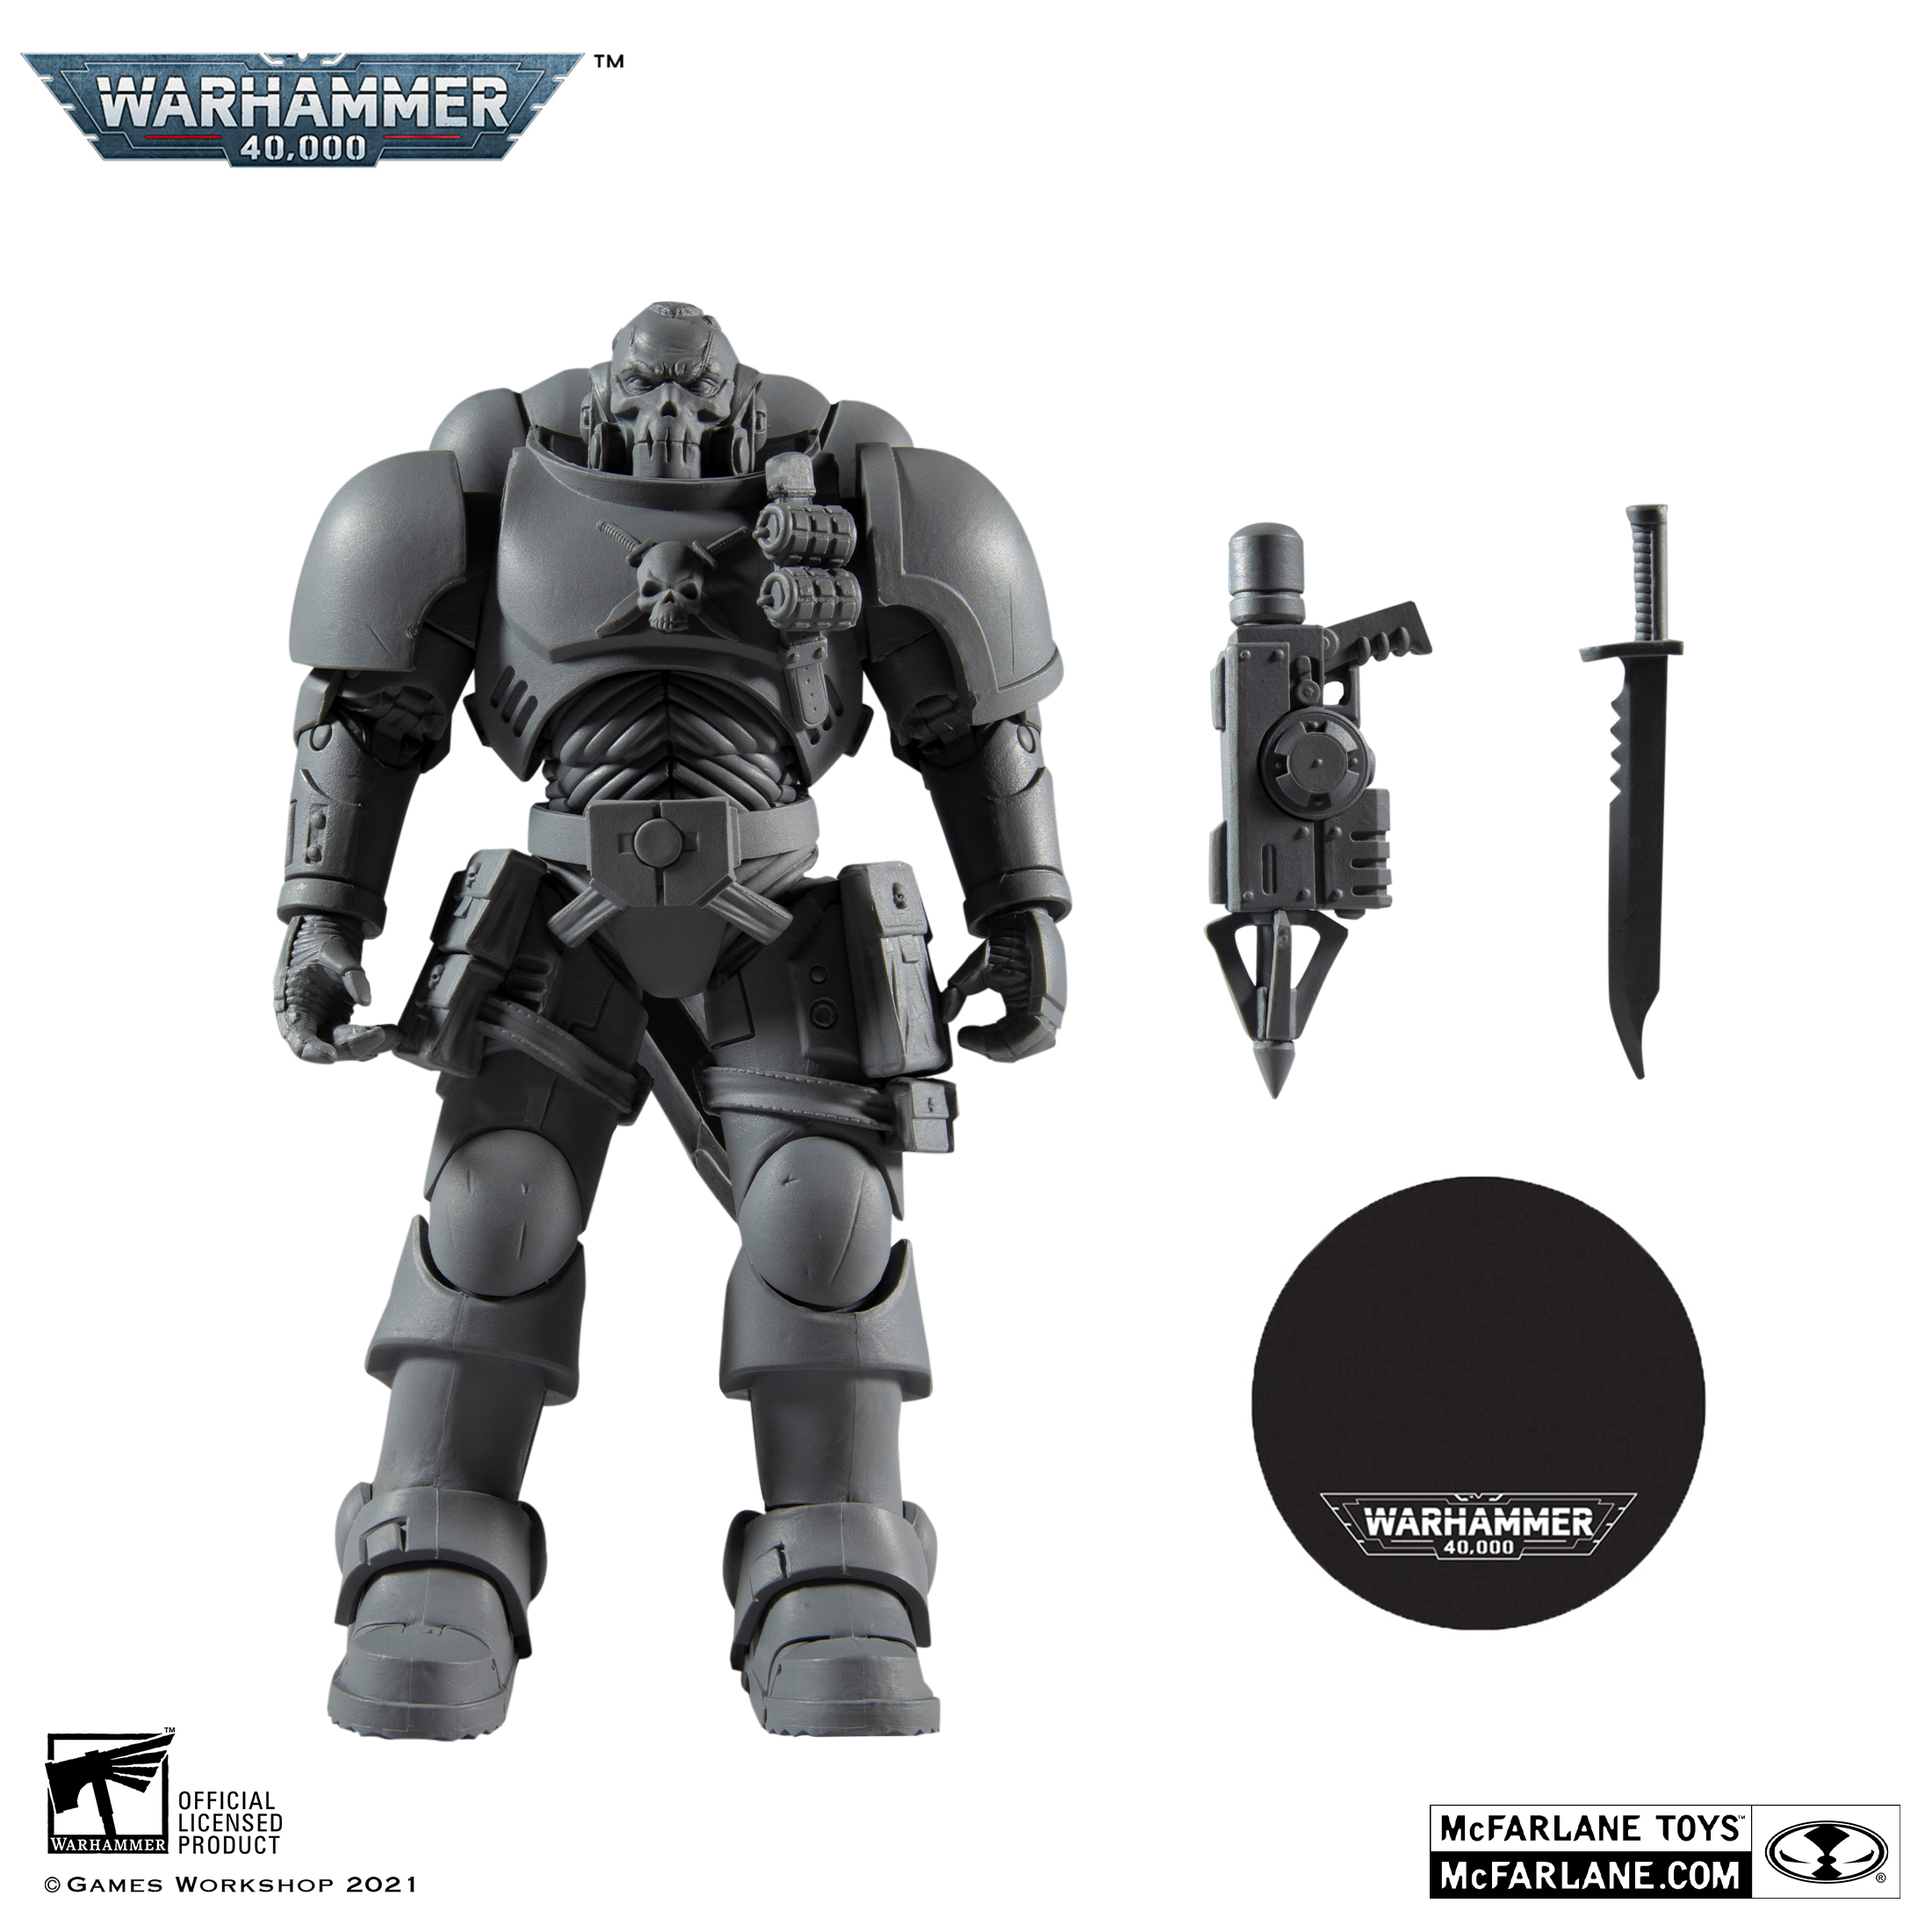 Warhammer 40,000 - Artists Proof Reiver Action Figure (McFarlane Toys)